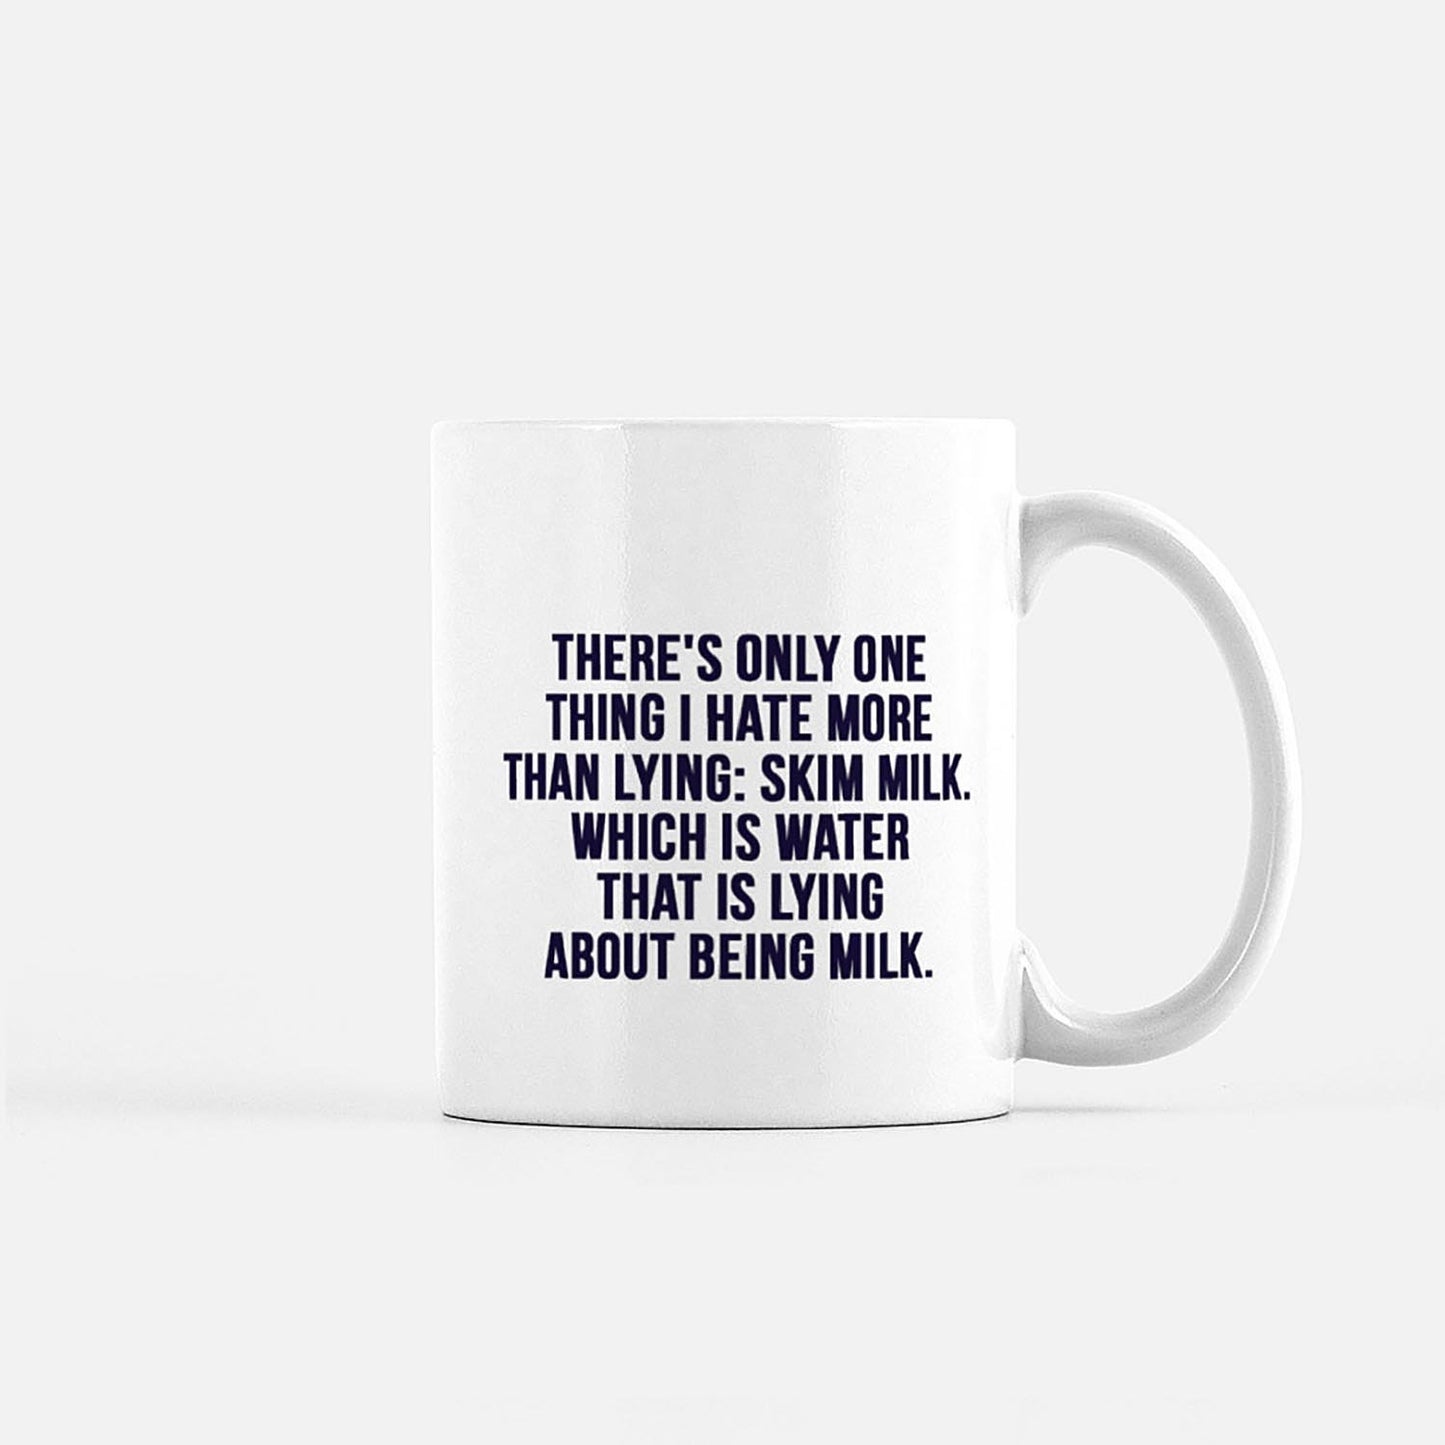 There's only one thing I hate more than lying: skim milk. Which is water that is lying about being milk. - Ron Swanson fan gift